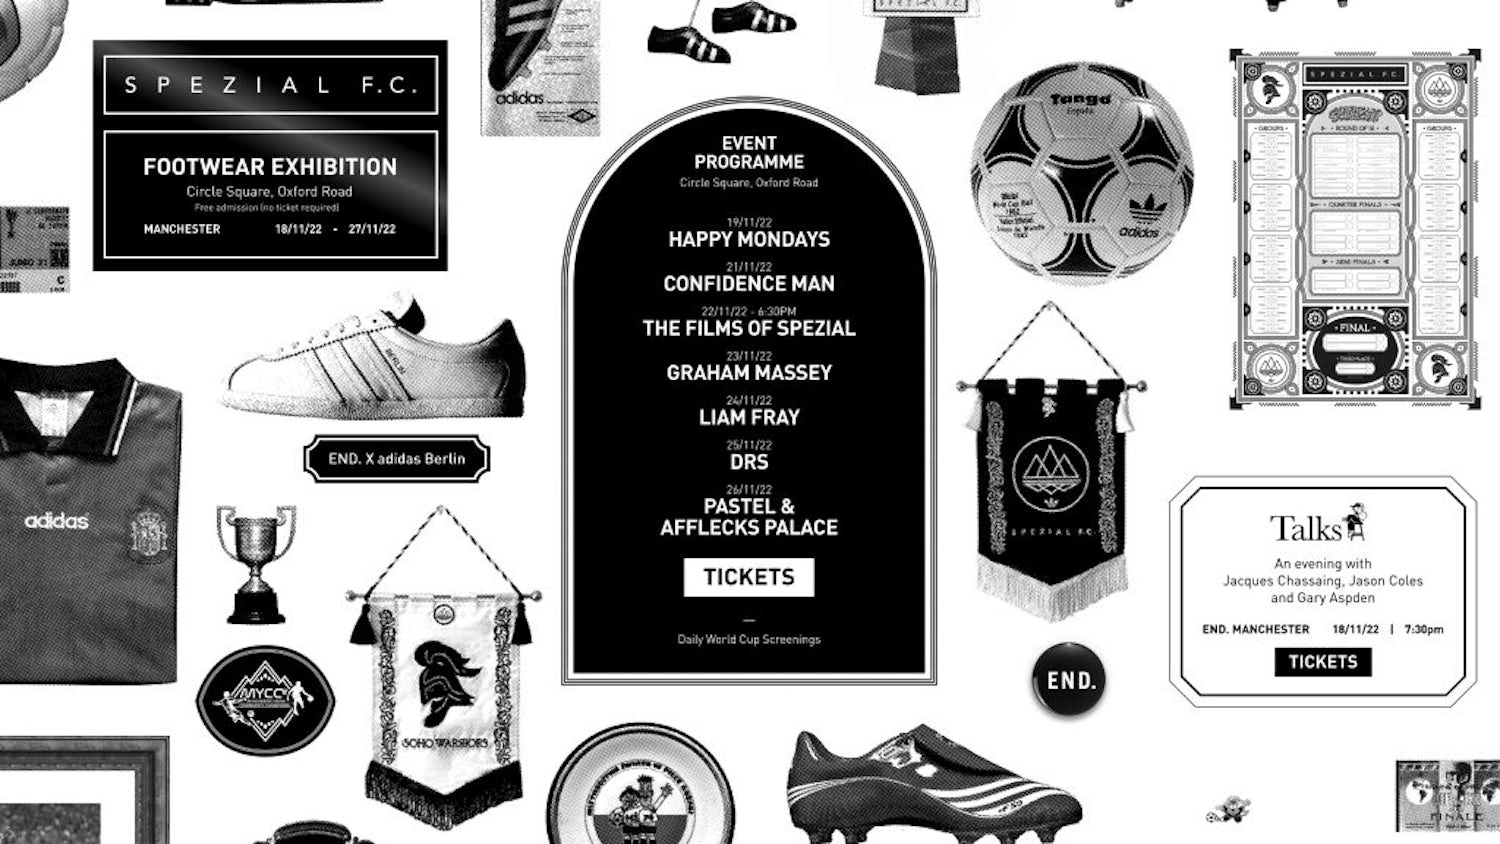 The Spezial football exhibition home page